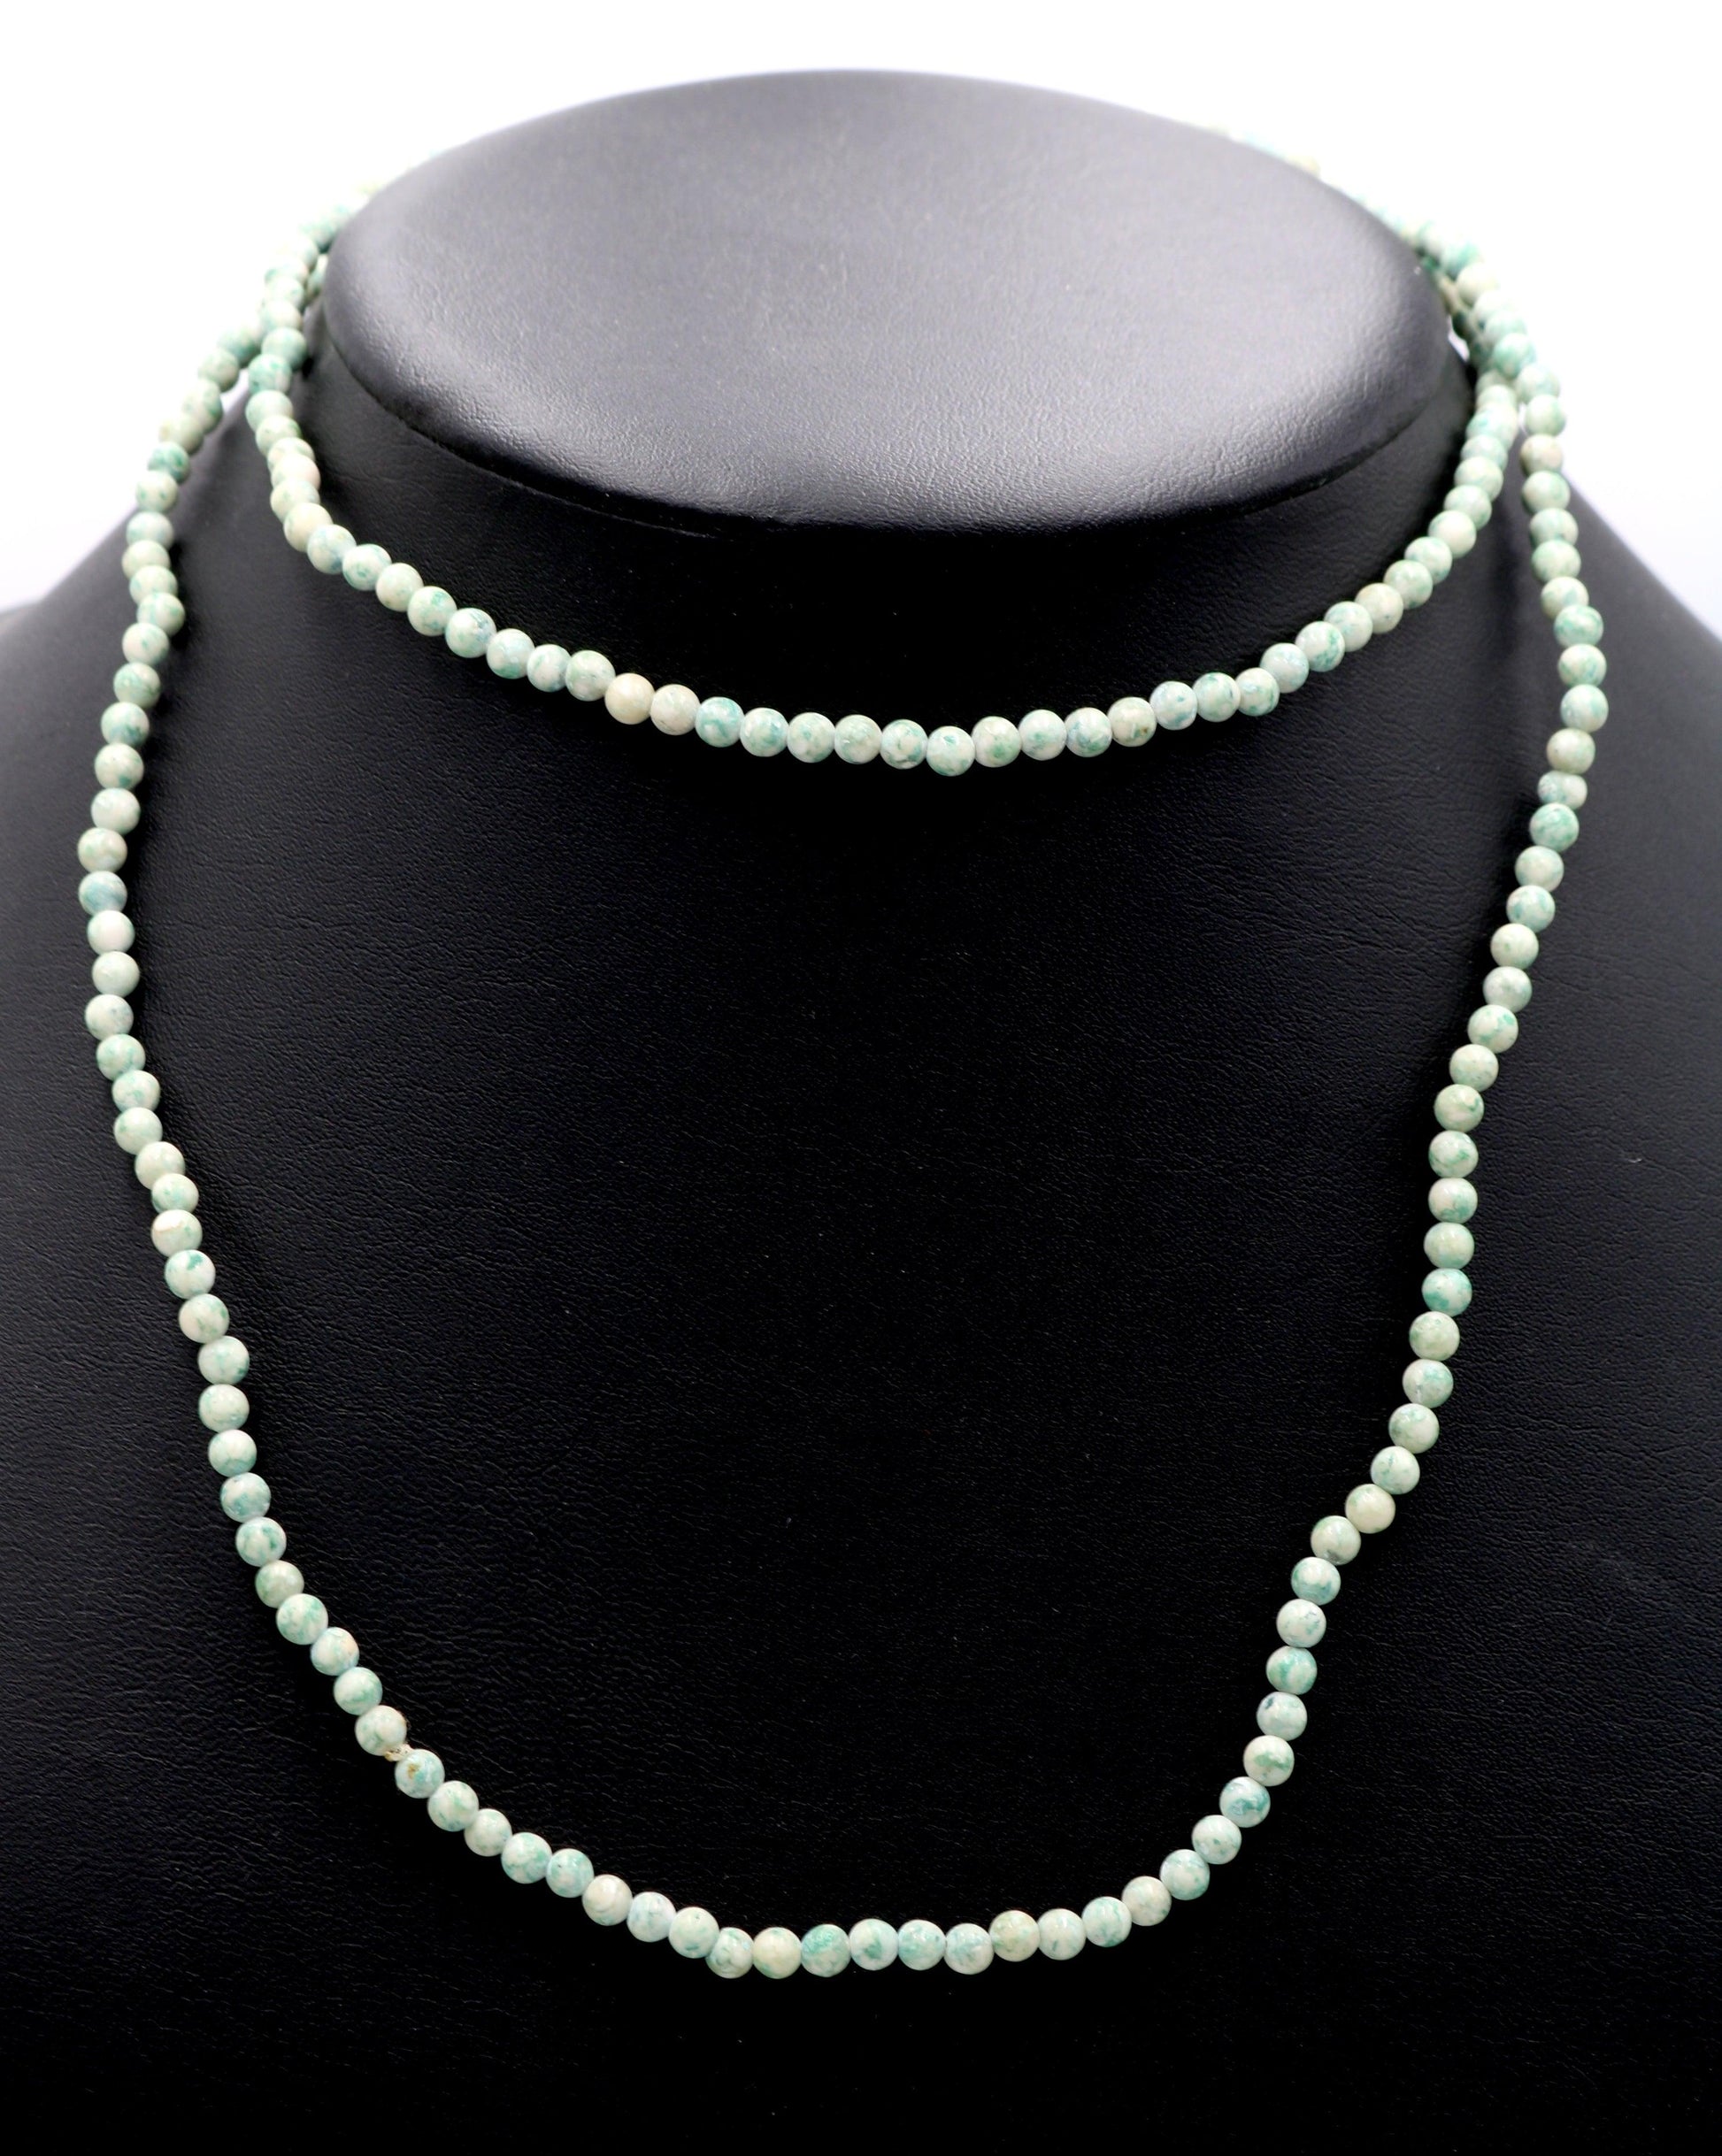 Vintage Inspired Women's Long Natural Speckled Mint Green 4mm Round Stone 18" Necklace Boho Accent Necklace Fun 2022 Gift - Monkeysmojo